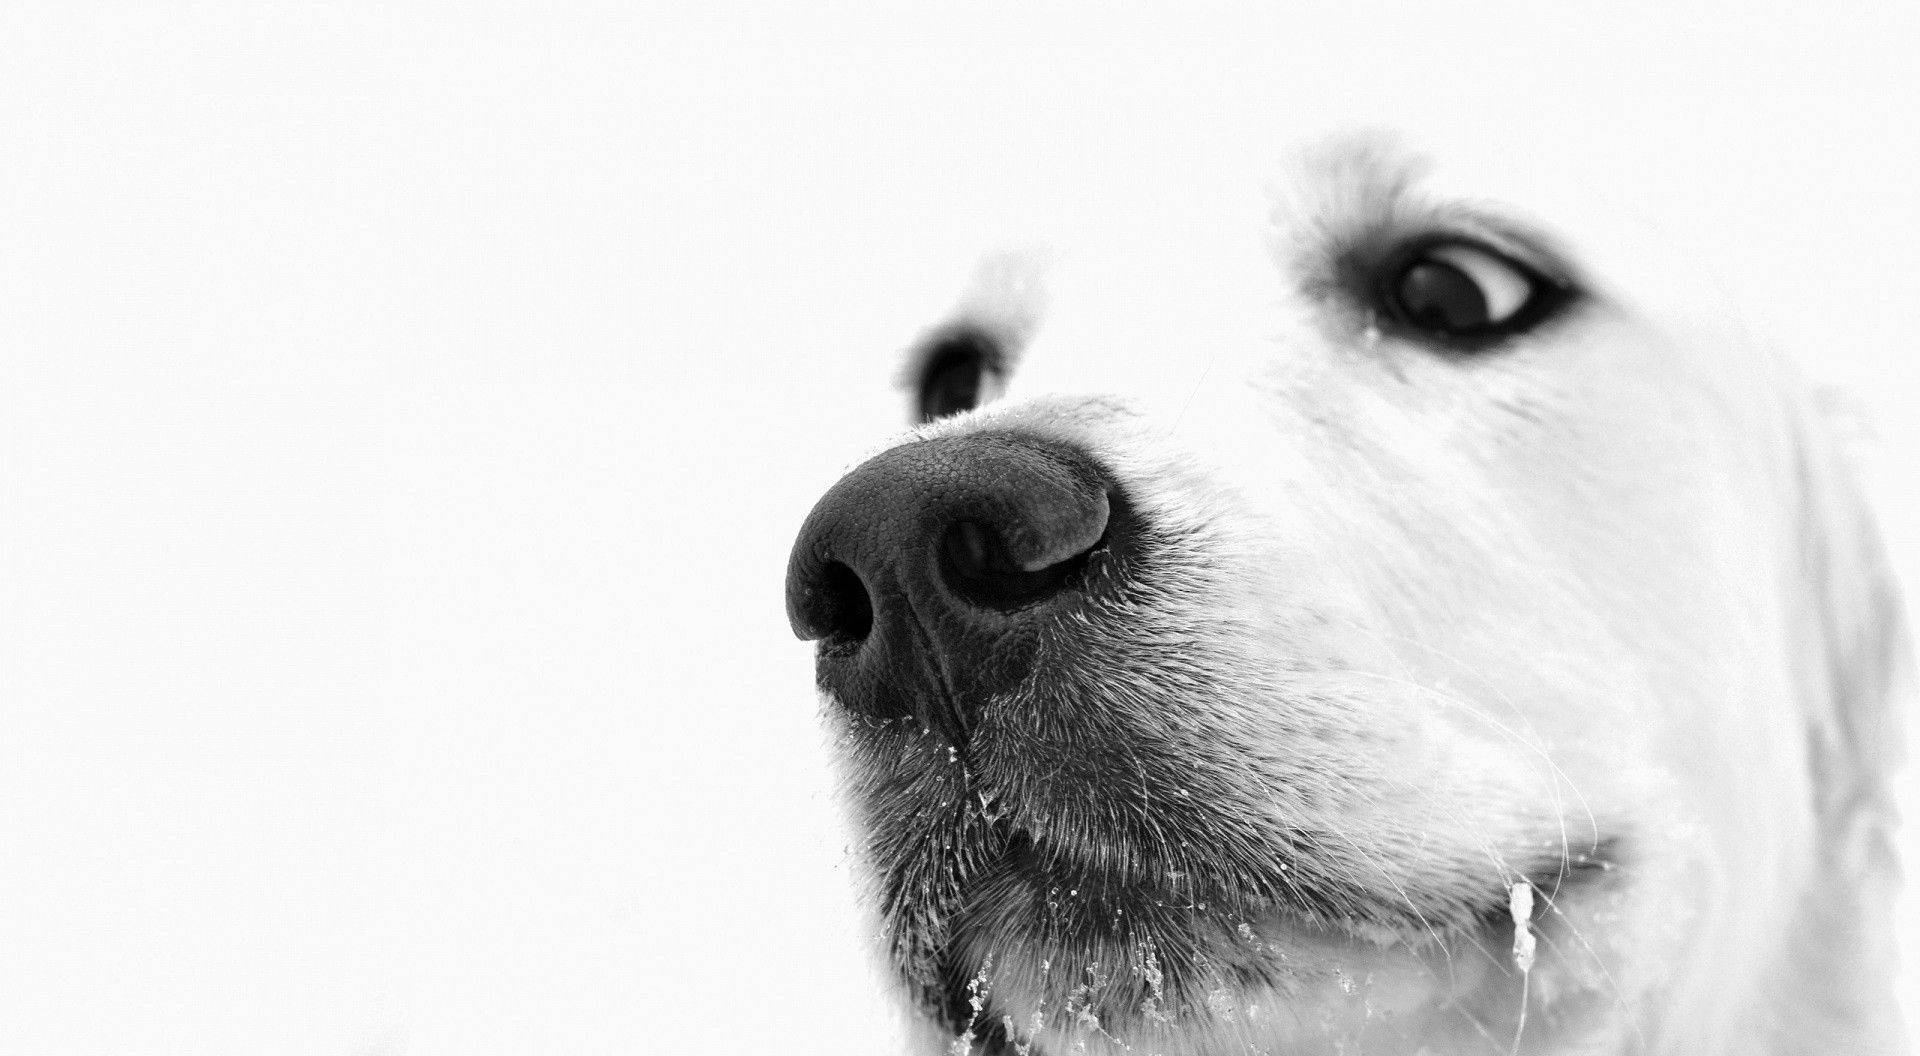 Free Black And White Dogs Wallpaper Downloads, [100+] Black And White Dogs  Wallpapers for FREE 